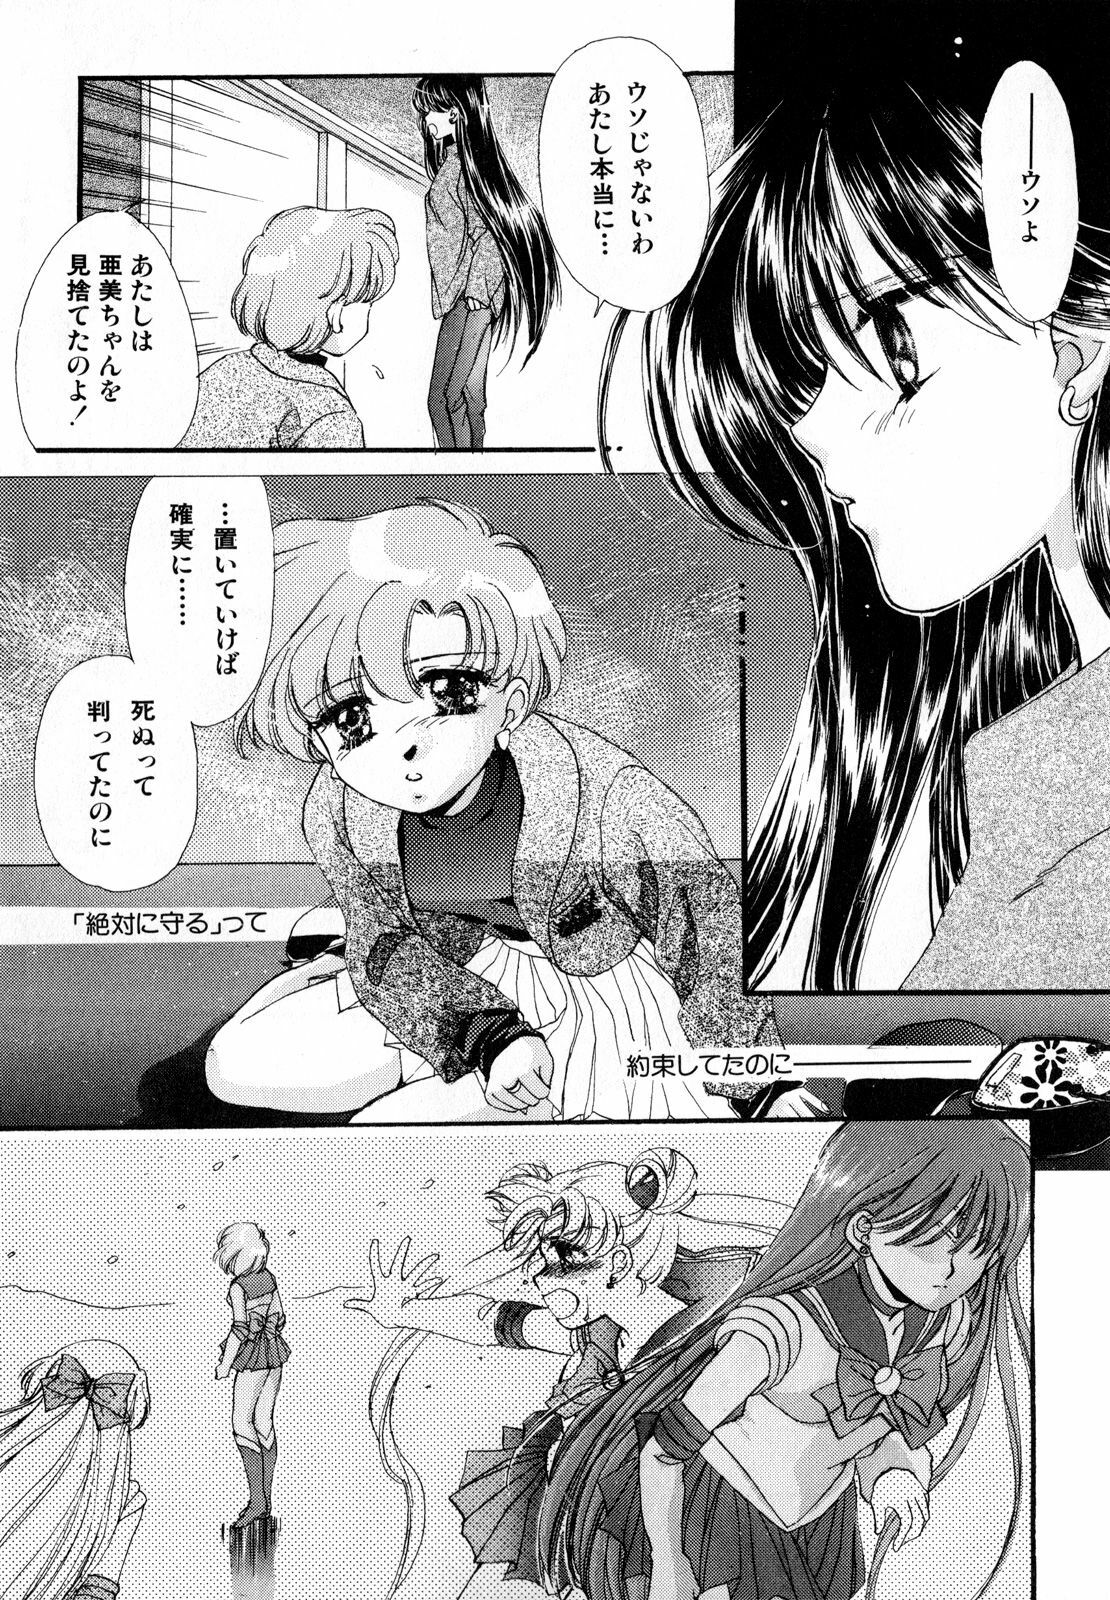 [Anthology] Lunatic Party 3 (Sailor Moon) page 21 full